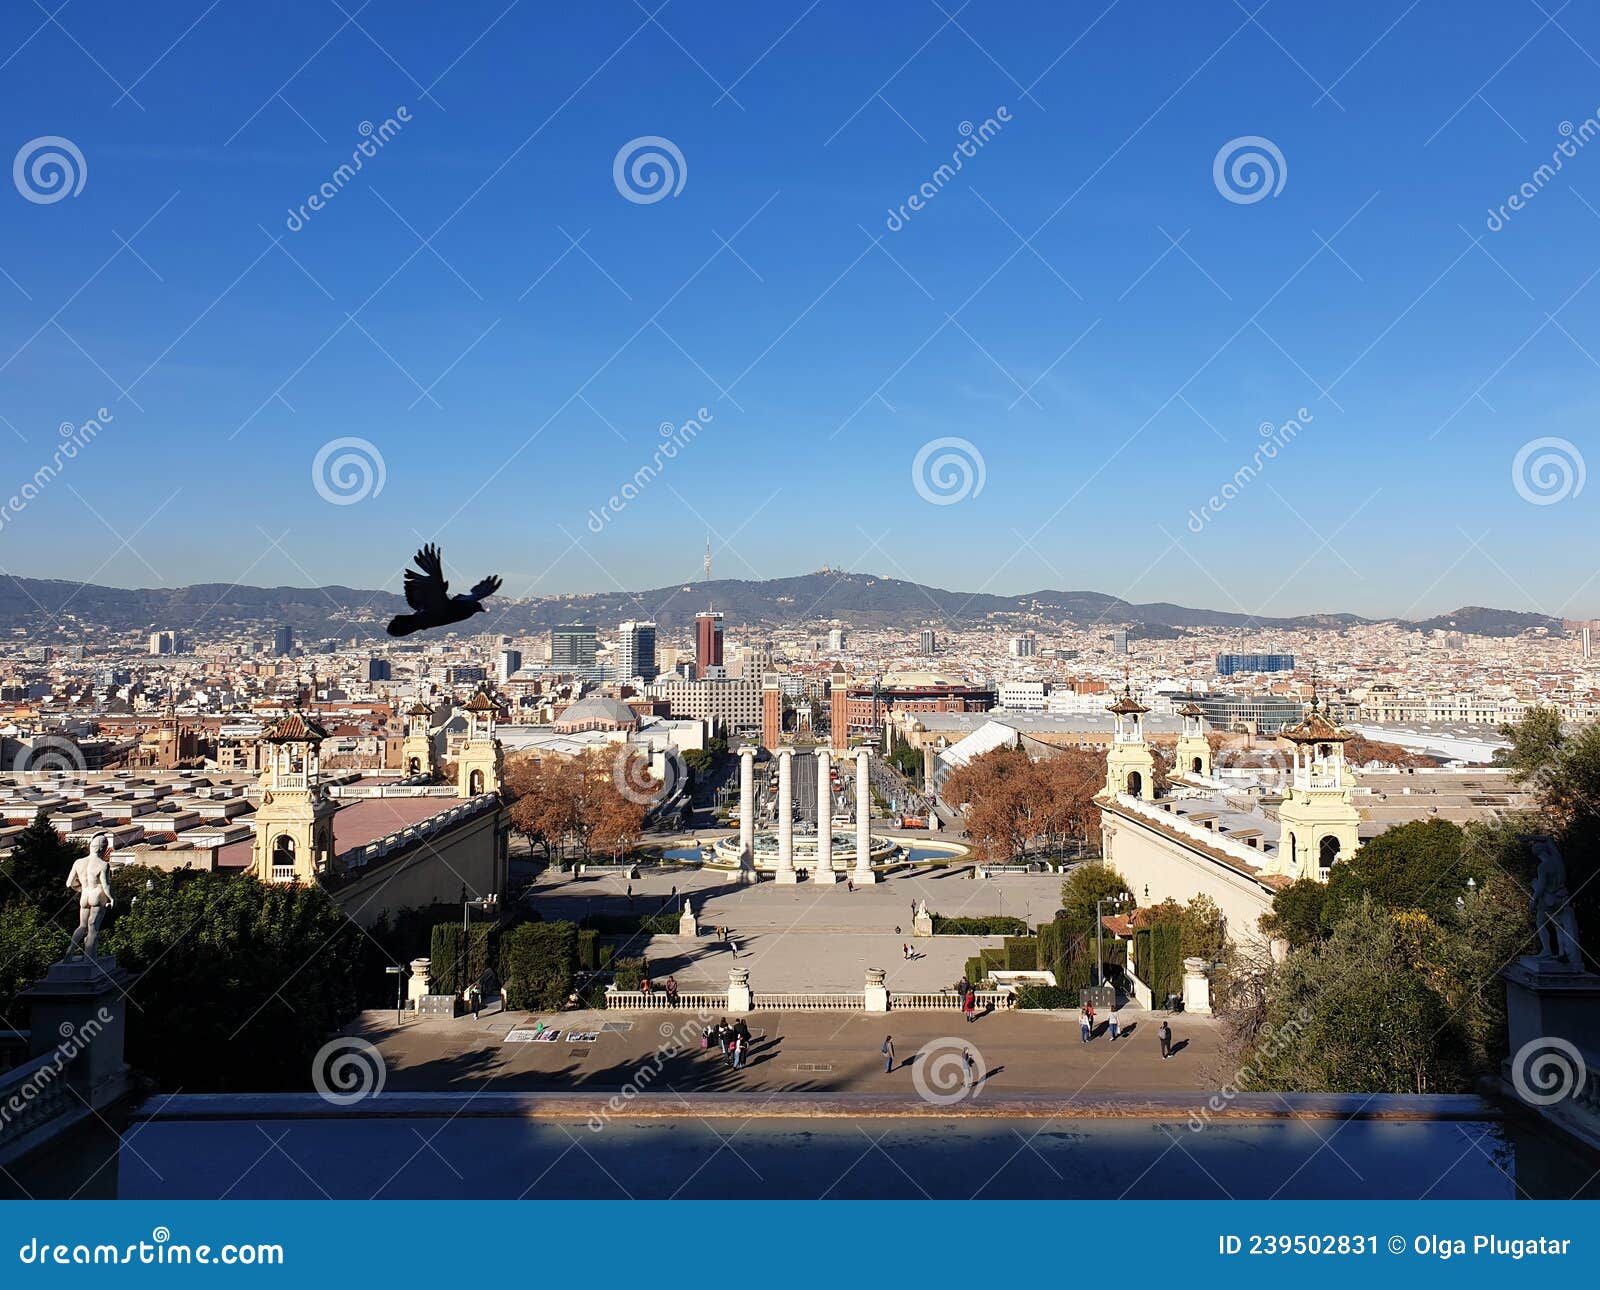 panoramic view from montjuic on barcelona city, plaza espana, sunny day, blue sky, spain